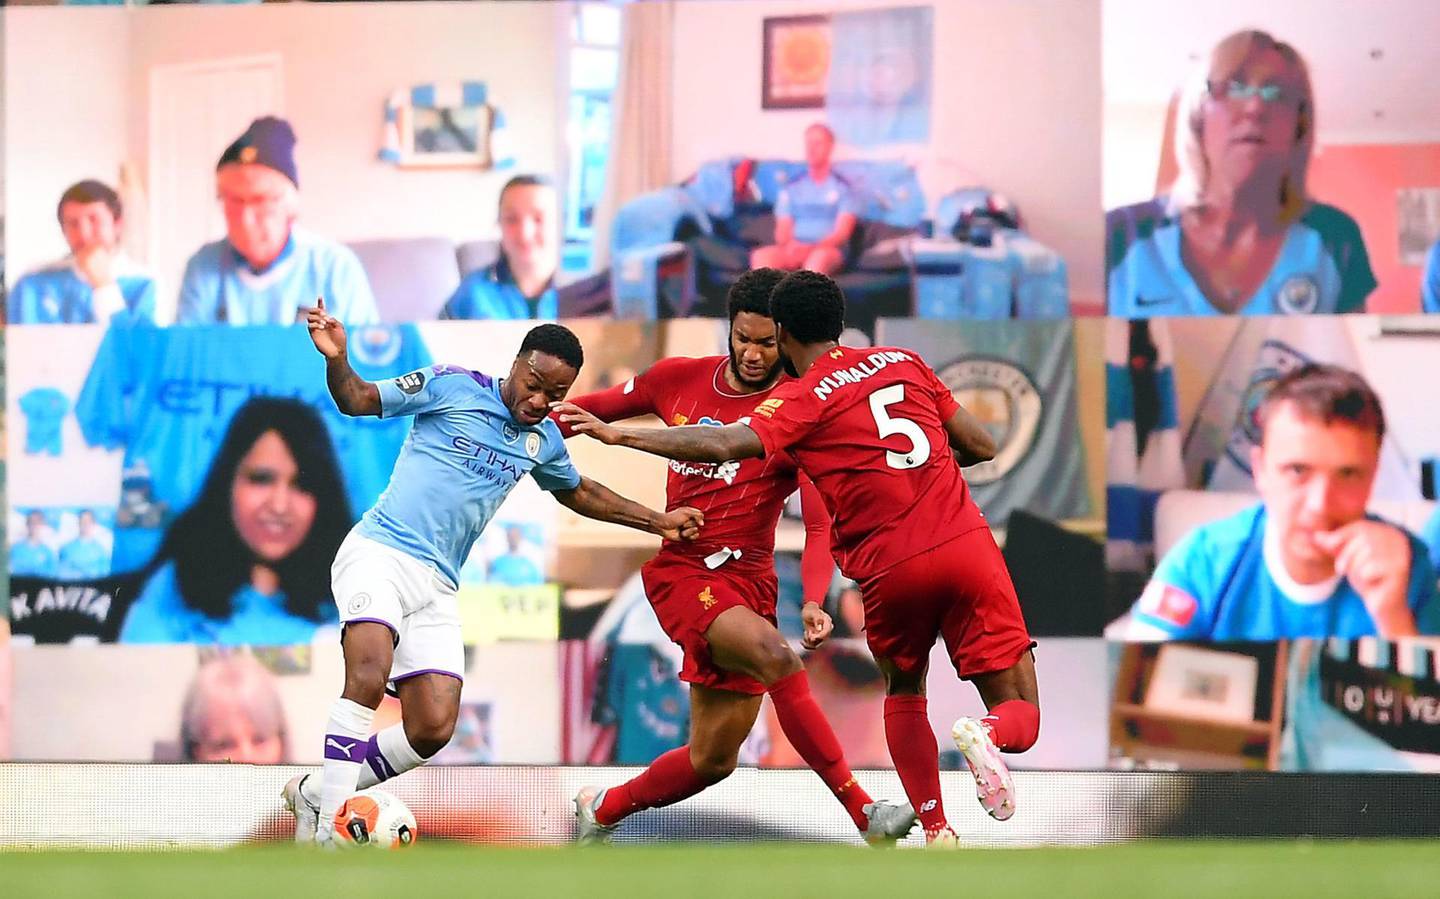 File photo dated 02-07-2020 of Liverpool's Joe Gomez concedes a penalty after holding back Manchester City's Raheem Sterling during the Premier League match at the Etihad Stadium, Manchester. PA Photo. Issue date: Thursday December 17, 2020. TV companies did their best to make up for the lack of atmosphere in empty stadiums and arenas by piping in crowd noise for the viewer. Manchester City also had a bank of screens behind one of the goals showing live fan reaction. But in a year when face coverings were prevalent, the gimmicks could not mask the cold truth that sport is a soulless affair without fans. See PA story SPORT Christmas 10 Things.  Photo credit should read Laurence Griffiths/NMC Pool/PA Wire.